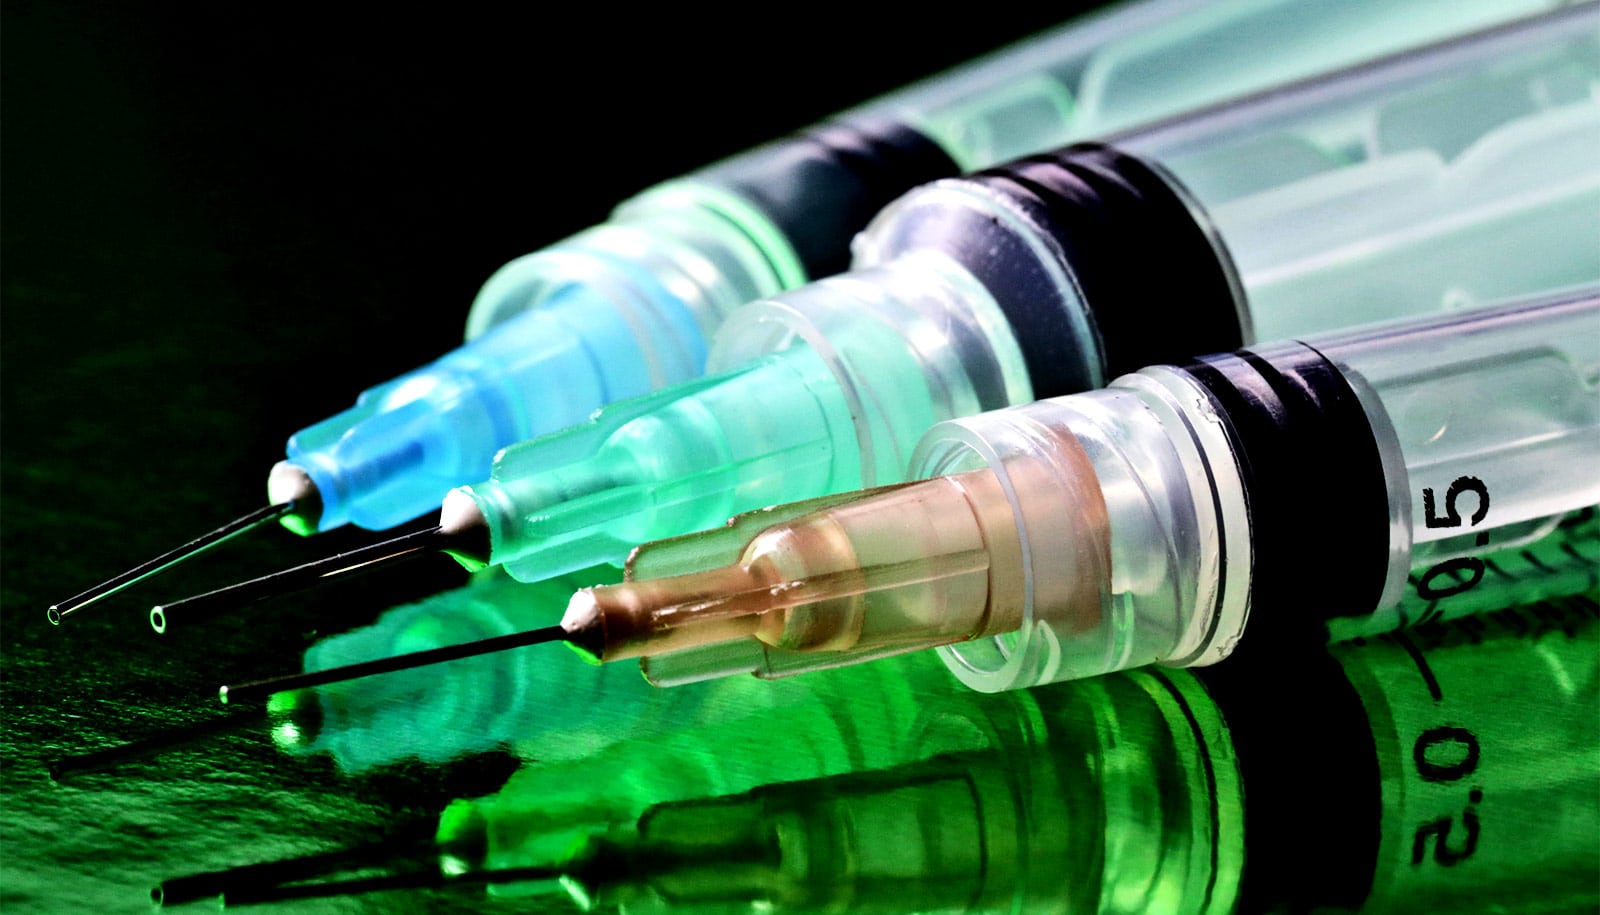 Most adults over 50 say they’ll get a COVID vaccine